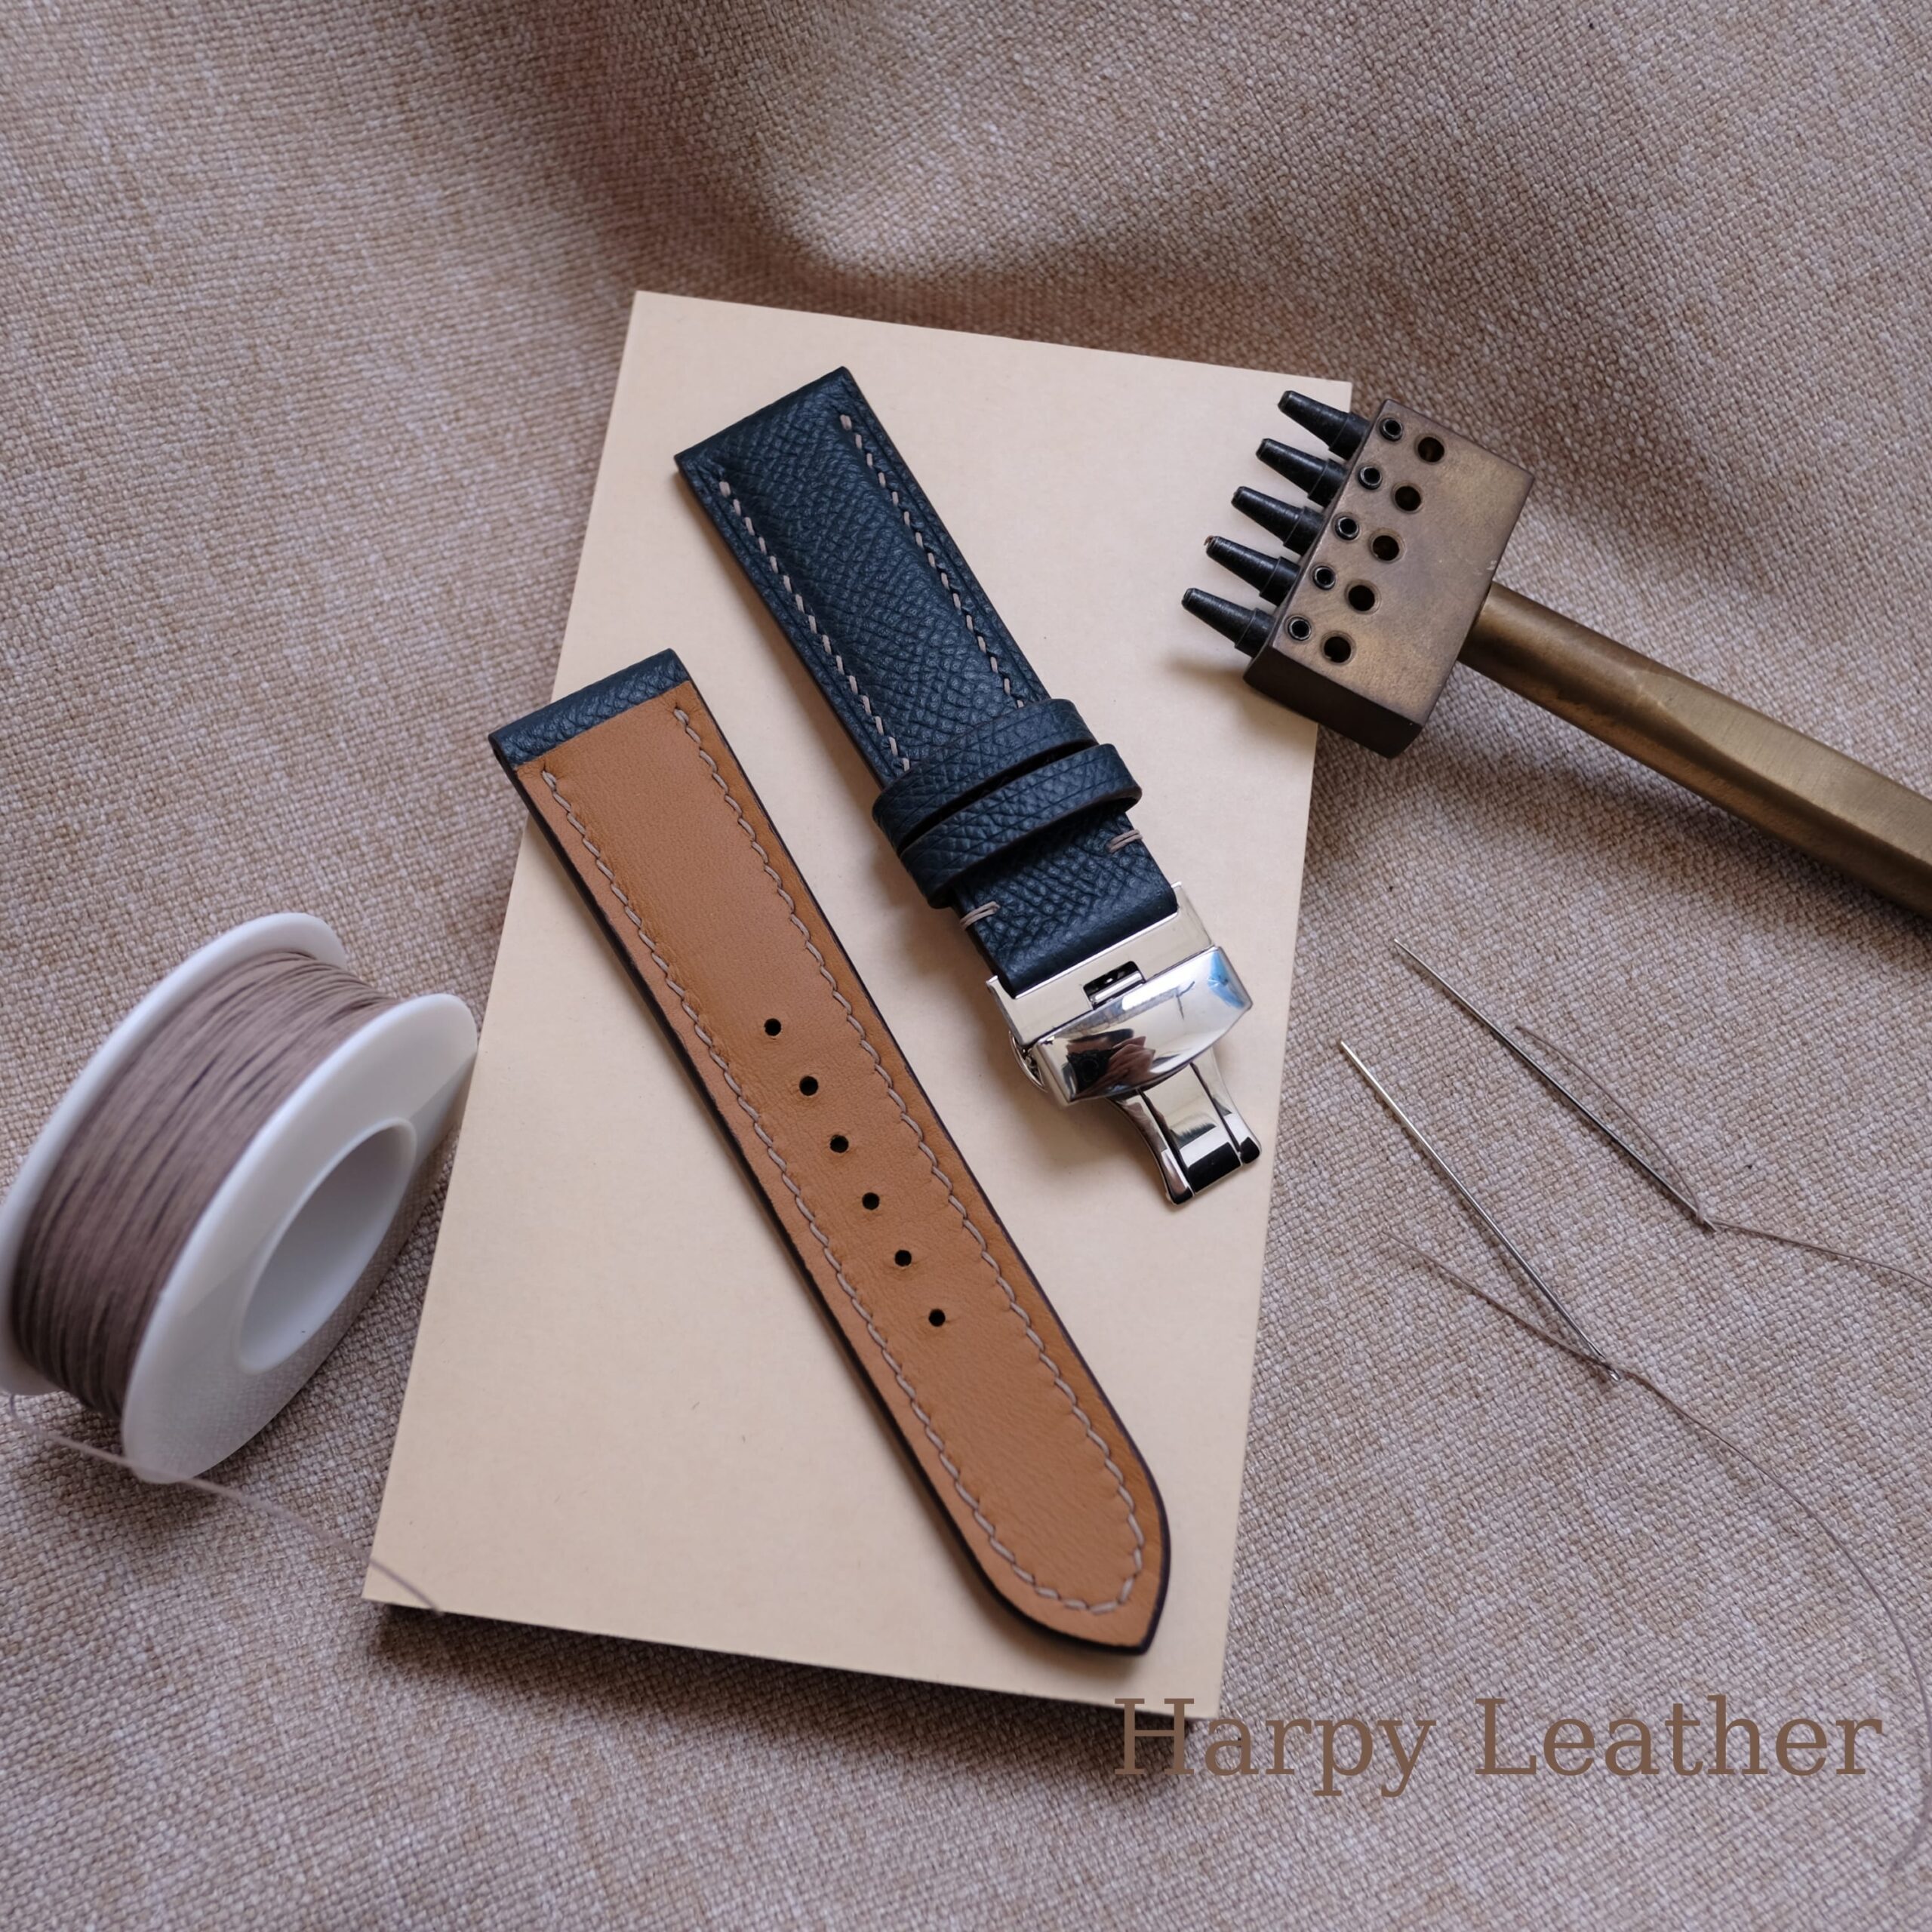 Blue Watch Strap & Band - Handmade leather watch strap - HARPY LEATHER